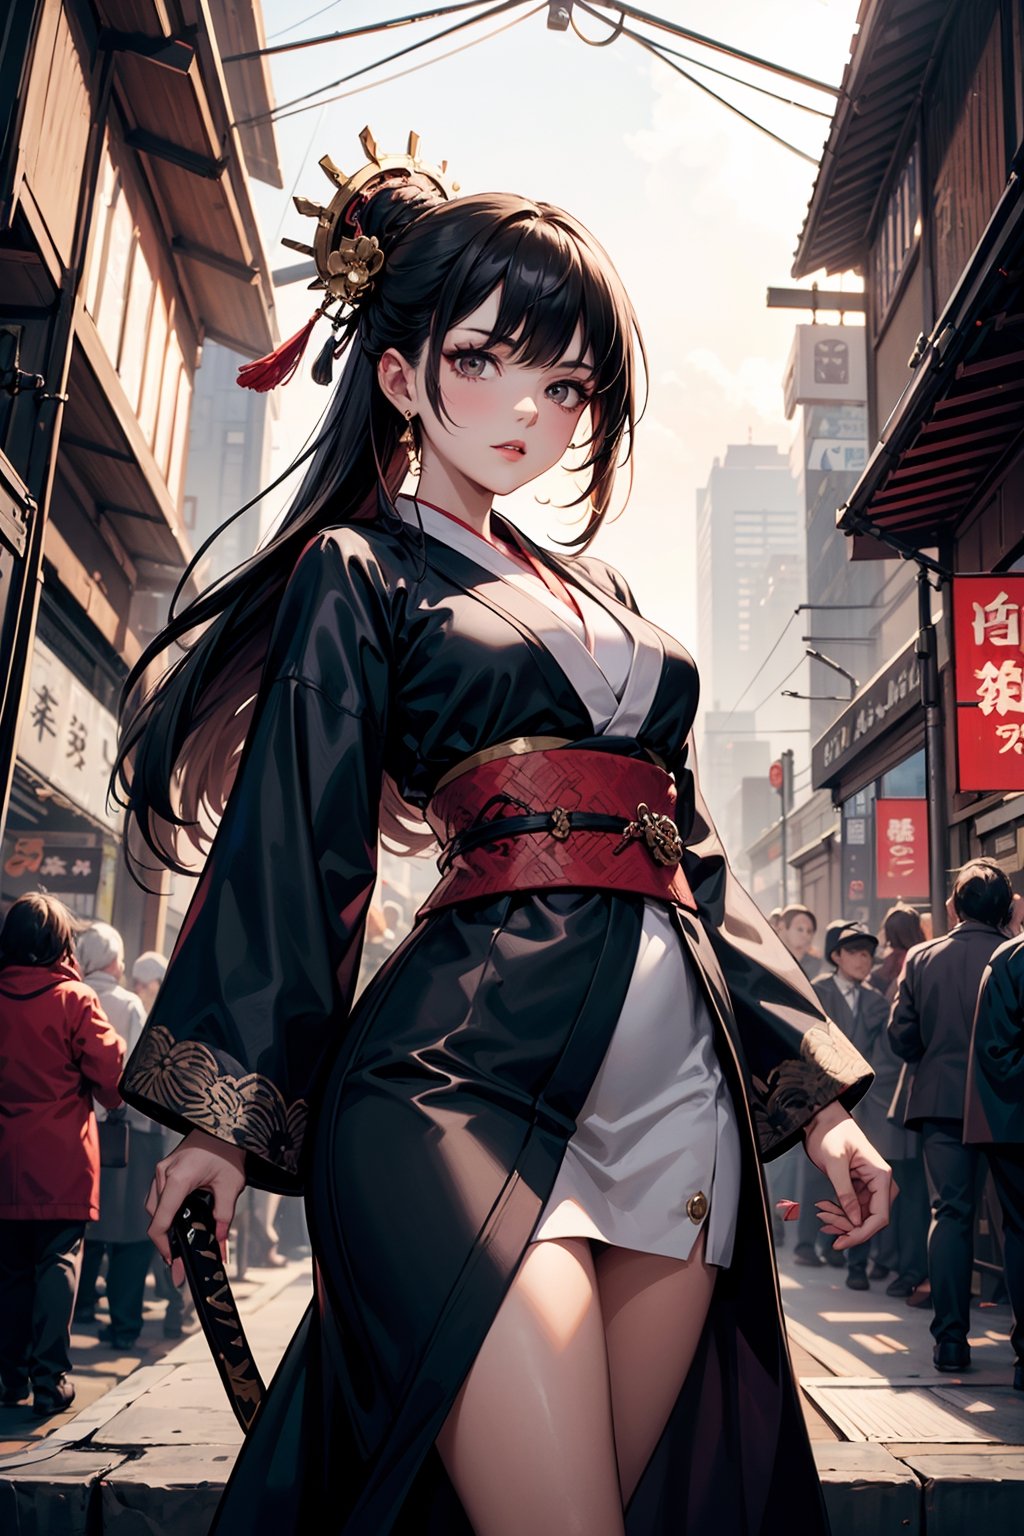 Imagine a bustling metropolis where Edo-era aesthetics collide with Victorian-era steam-powered technology. In the heart of this fusion, stands a formidable woman, the matriarch of a powerful mafia syndicate. Dressed in a blend of traditional kimono and steampunk attire, she exudes an aura of authority and elegance. Her hair, adorned with intricate ornaments, cascades in waves, framing a face etched with determination and cunning. Clutched in her hand is a sleek, modified katana infused with gears and brass accents, symbolizing her mastery of both ancient swordsmanship and cutting-edge innovation. Behind her, towering skyscrapers adorned with paper lanterns and brass fixtures loom, hinting at the underworld empire she commands.